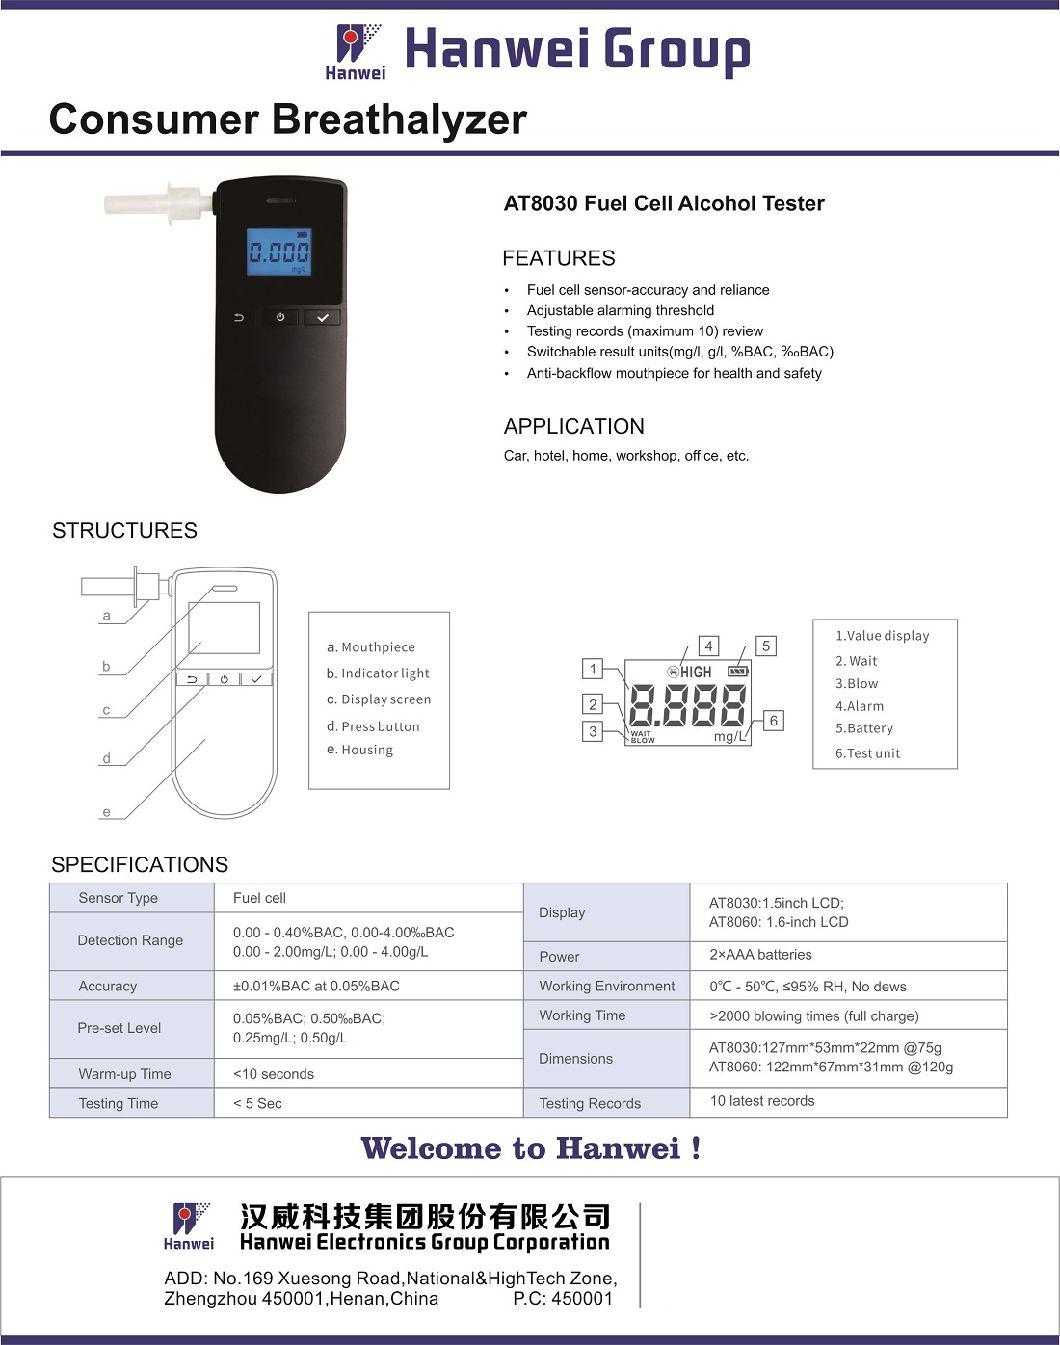 CE/RoHS Digital Alcoholimeter Tester Portable Accurate Readings Alcohol Tester with Audible Alert